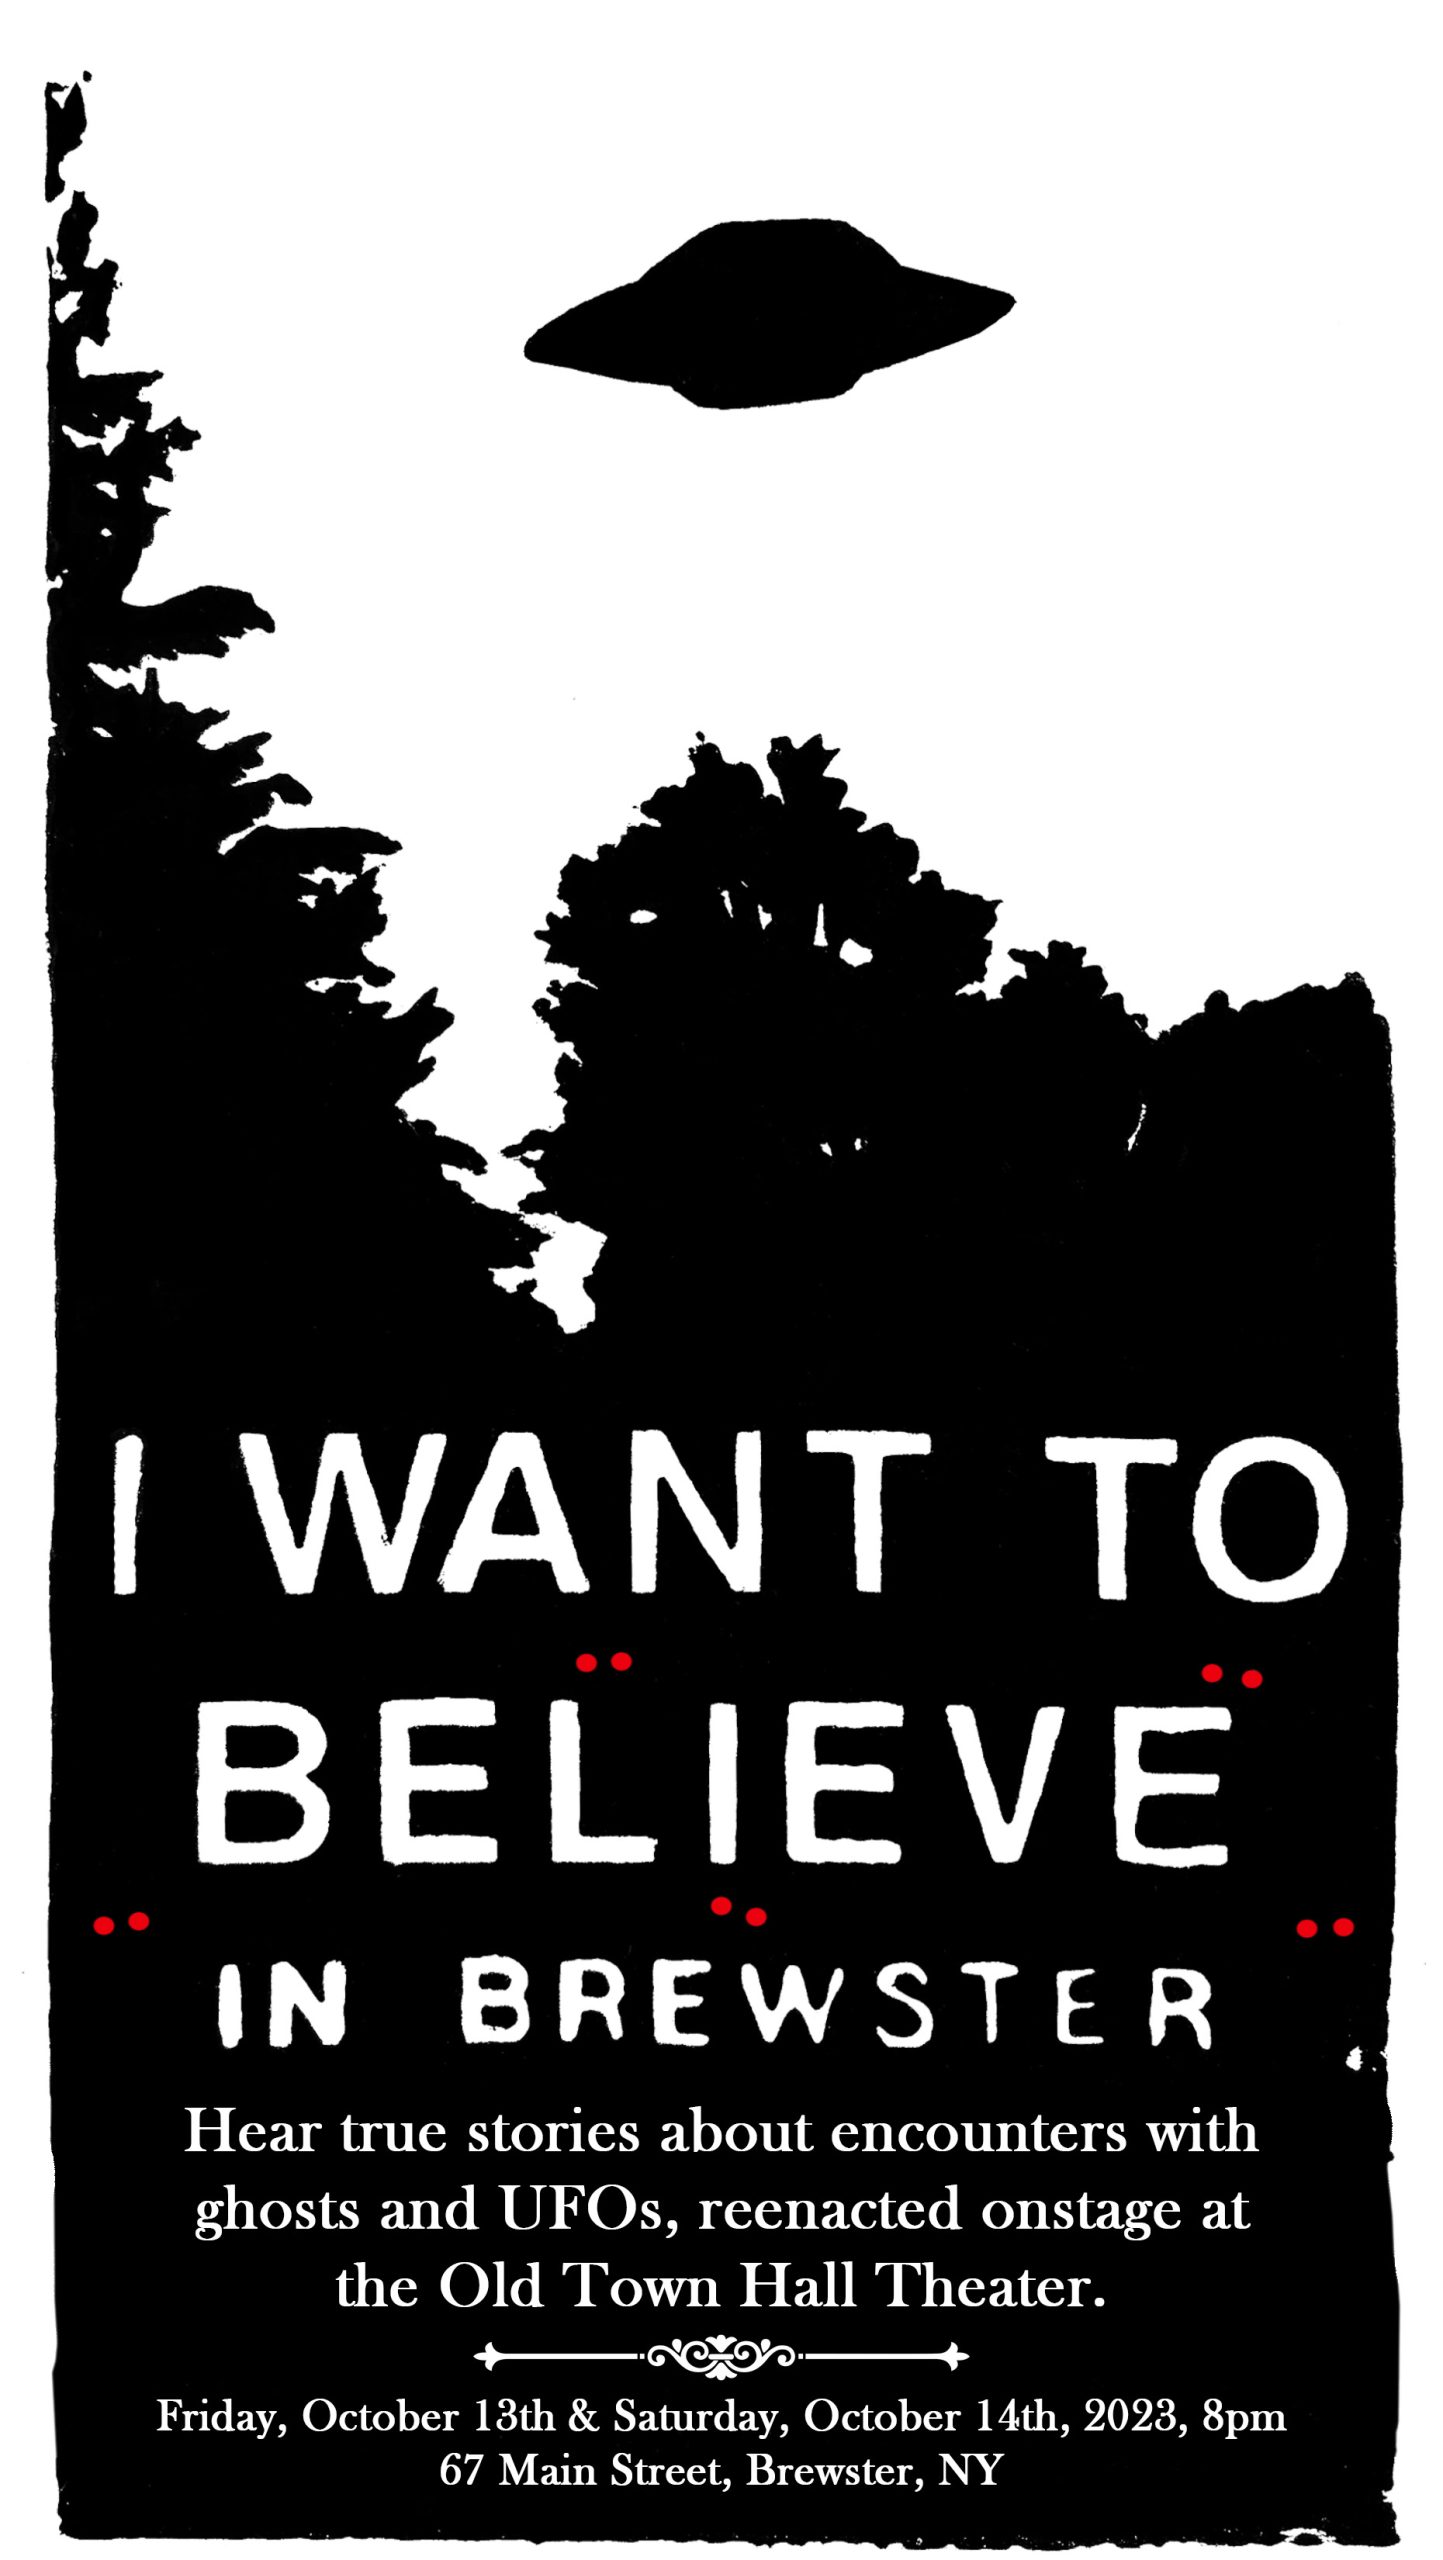 I Want to Believe in Brewster: Real Stories of Ghosts and UFOs in the Hudson Valley